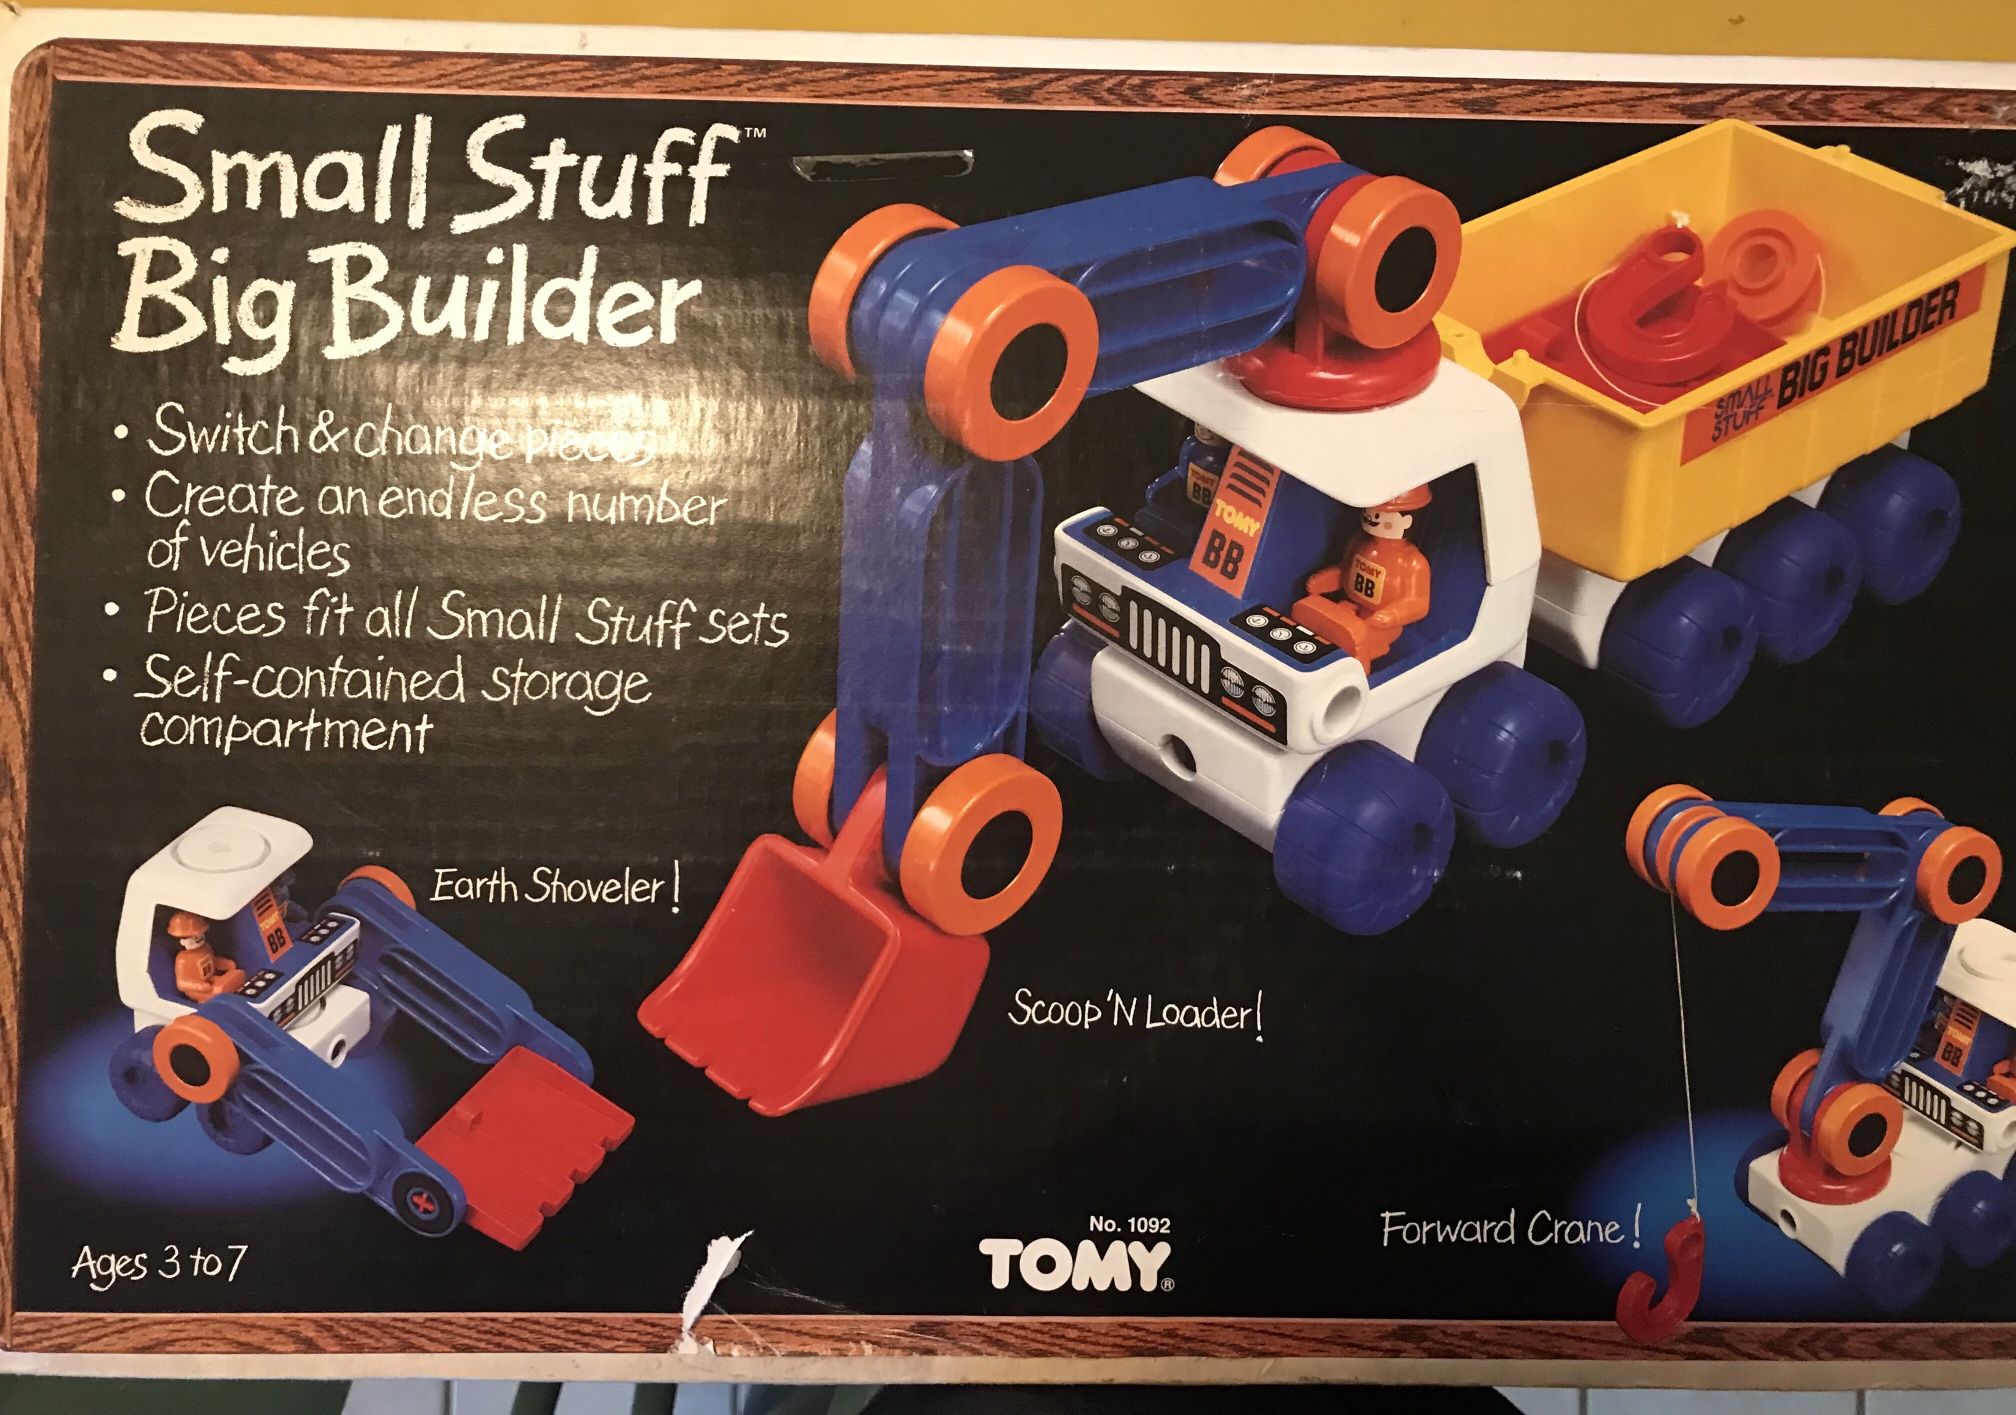 Vintage Tomy Small Stuff Big Builder with box 1984, also Tomy Space Shuttle pieces $10